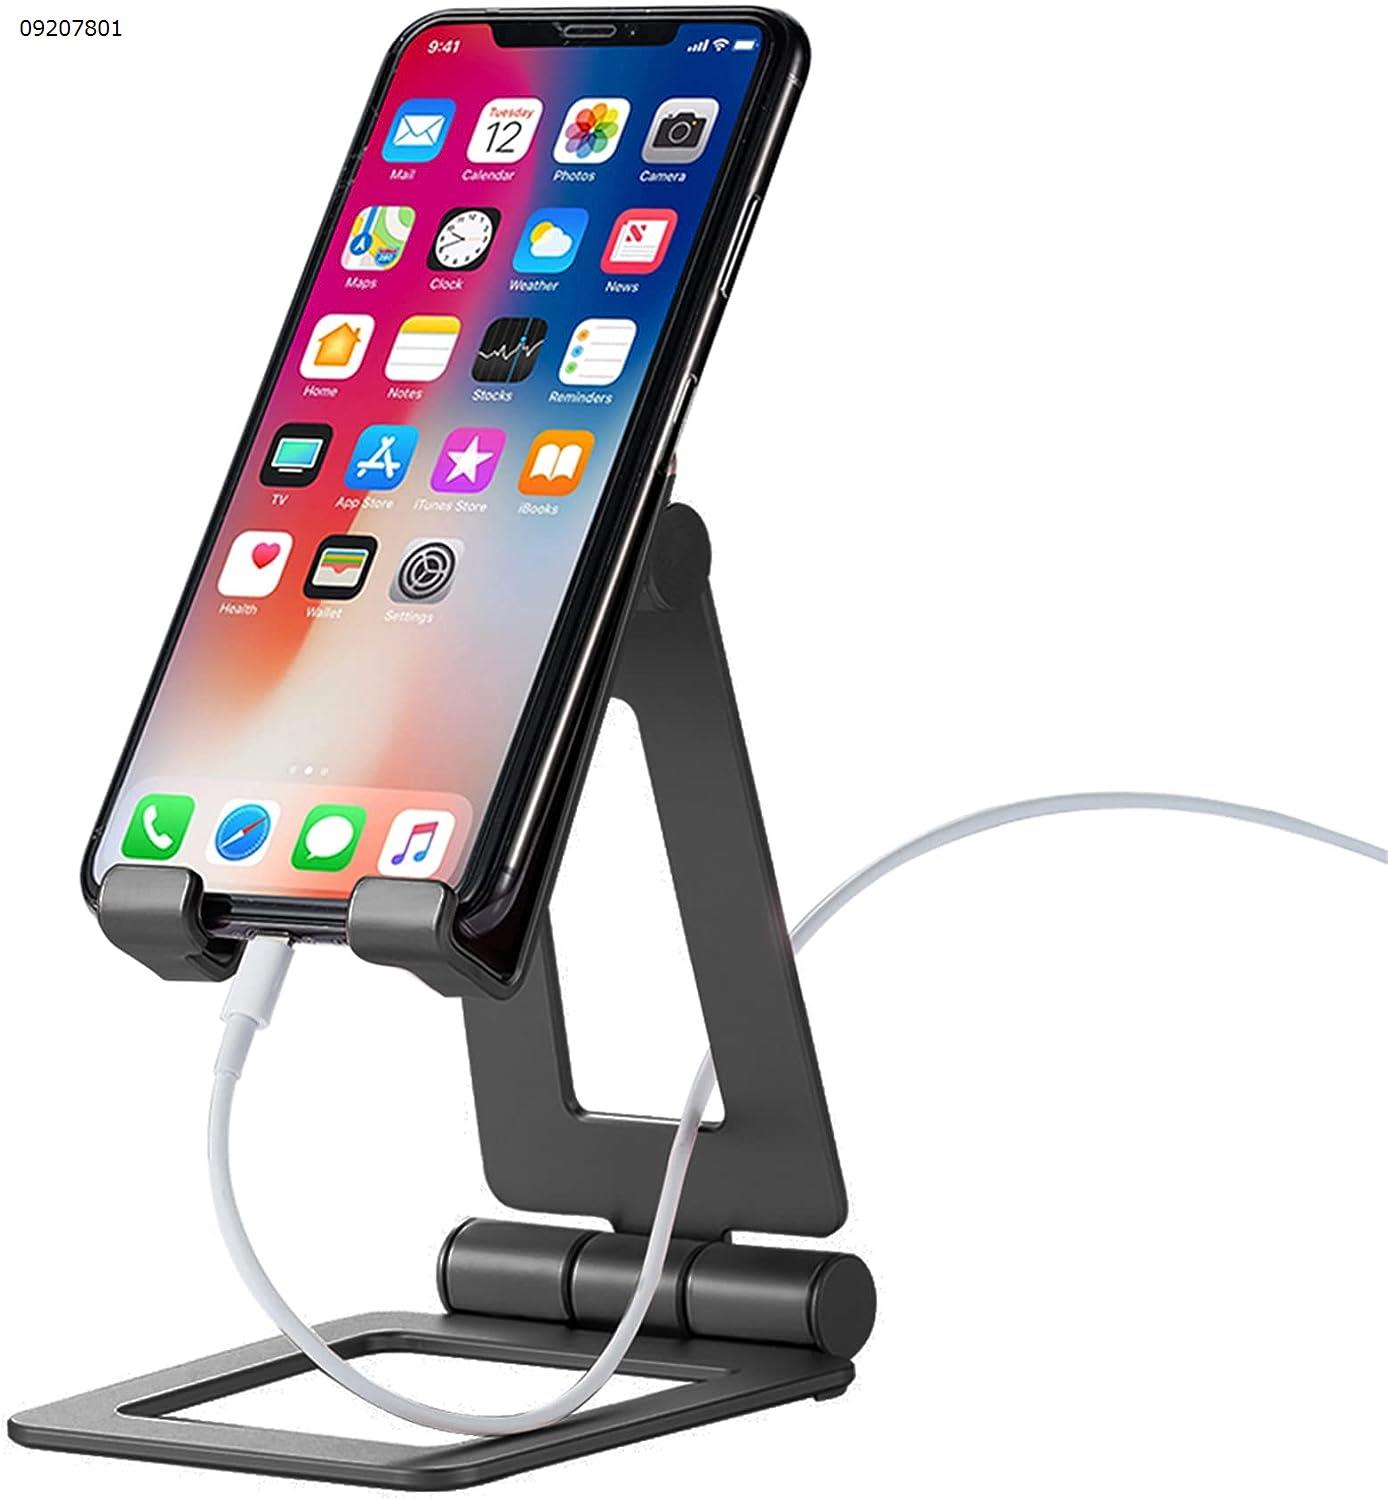 Black Mobile Phone Stand, Adjustable (Multi-Angle) Mobile Phone Holder Table Foldable Tablet Mobile Phone Holder Made of Aluminium Alloy Lightweight Phone Stand for Huawei, Samsung, Other Smartphones Mobile Phone Mounts & Stands  Z24